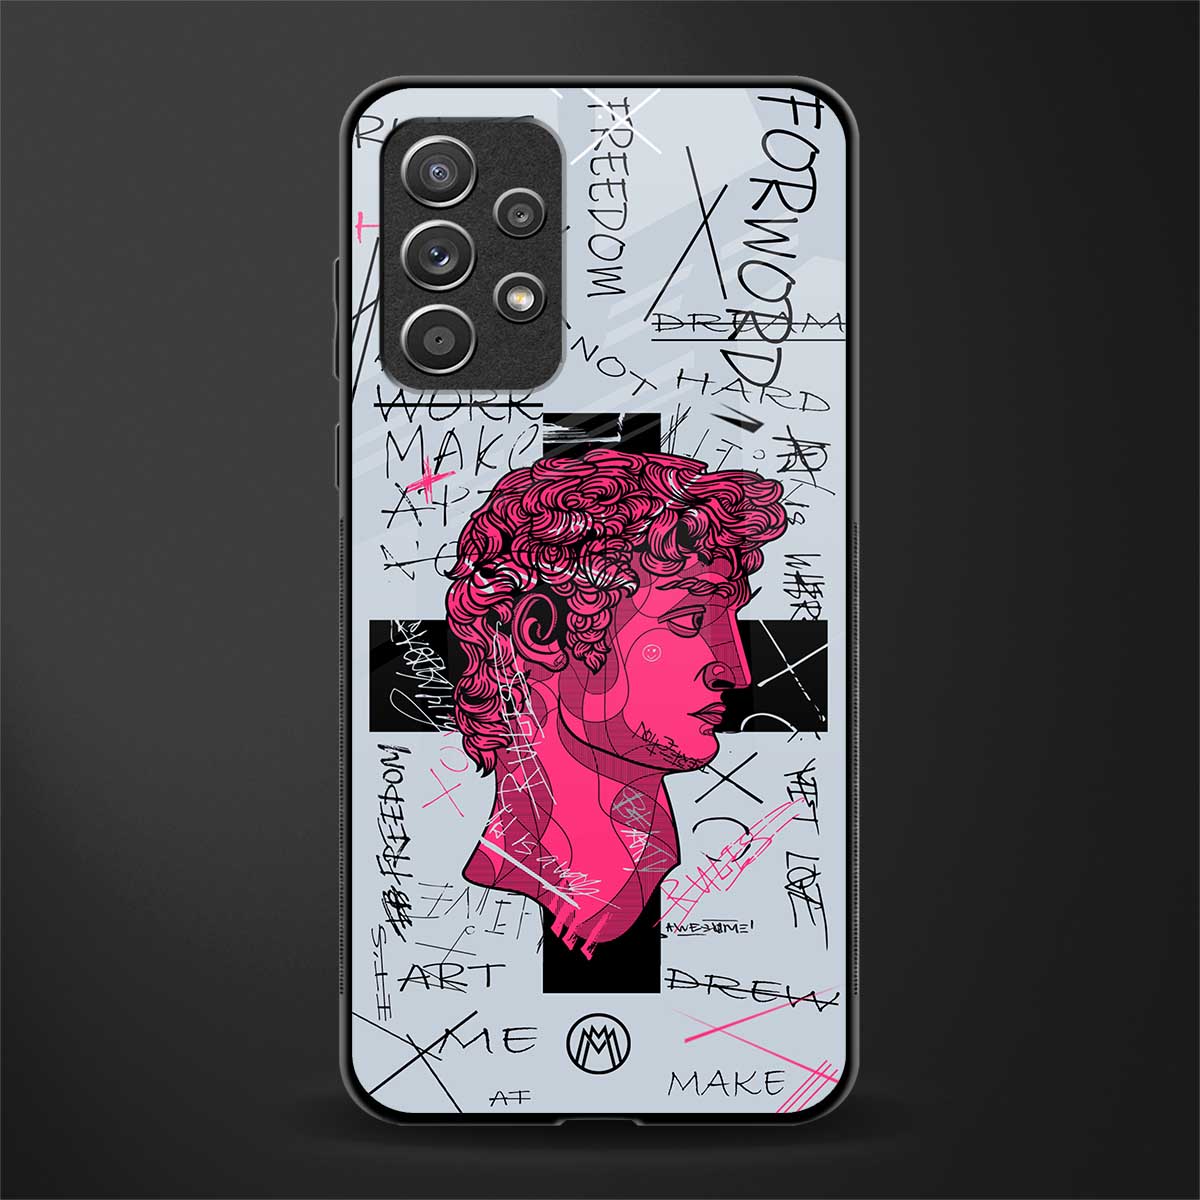 lost in reality david glass case for samsung galaxy a52s 5g image